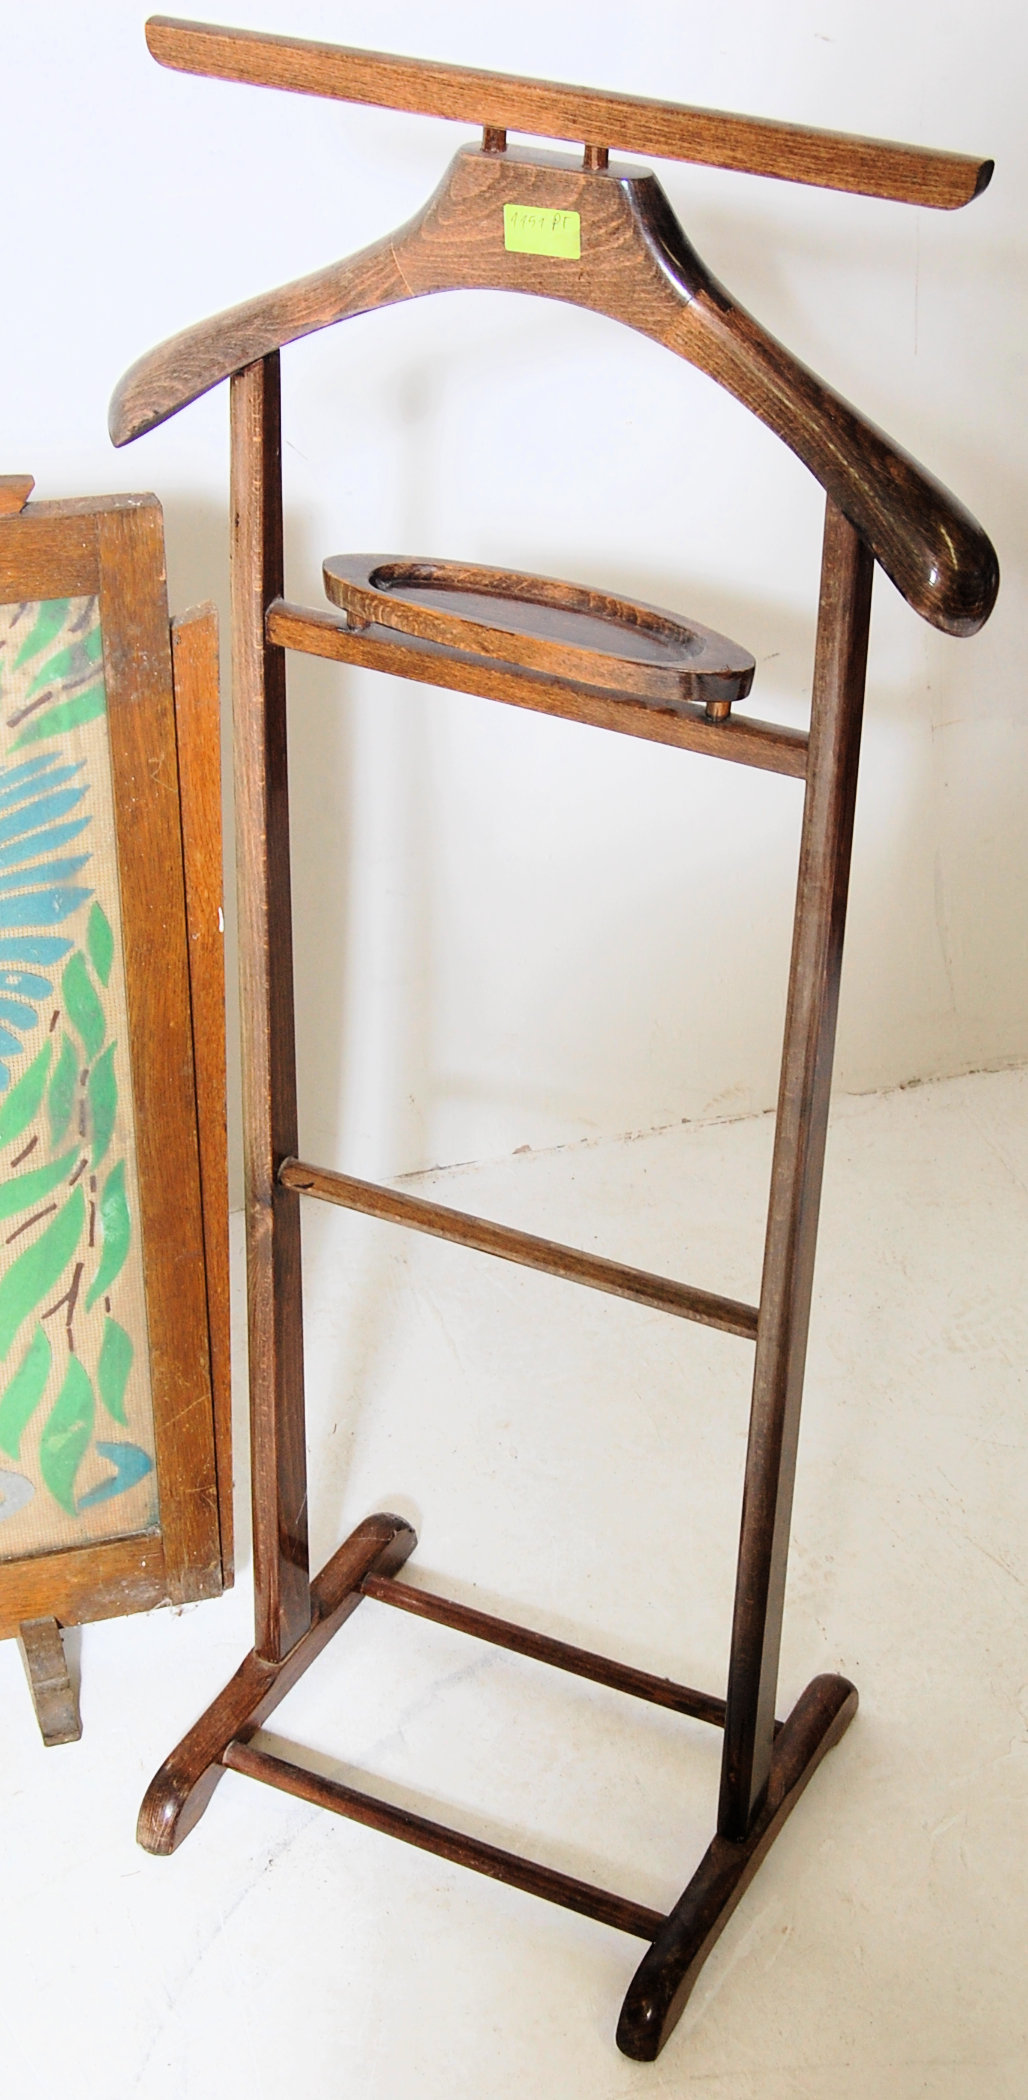 GROUP OF THREE PIECES OF 20TH CENTURY ANTIQUE FURNITURE - Image 5 of 5